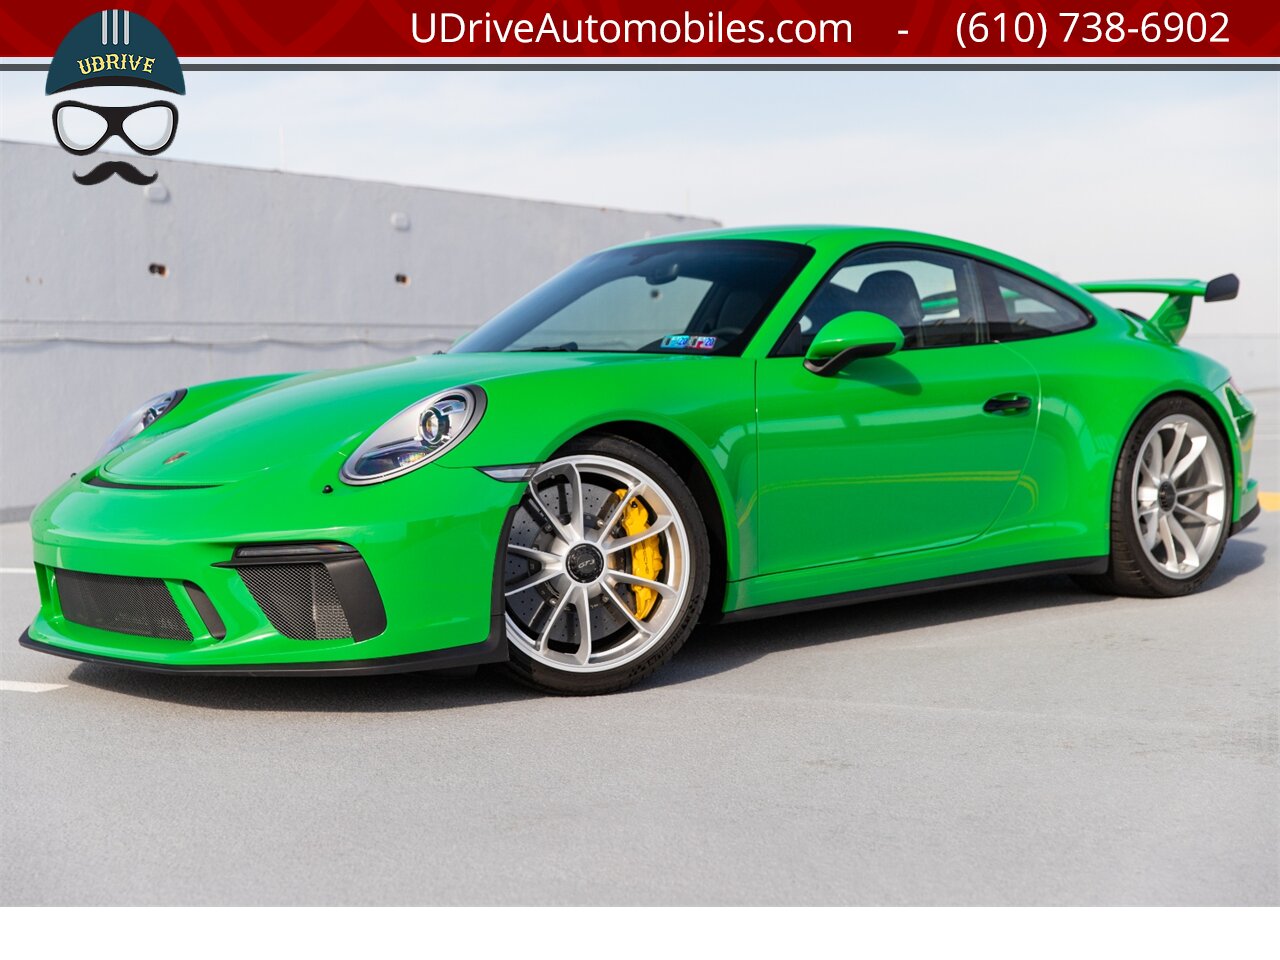 2018 Porsche 911 GT3 6 Speed Paint To Sample Viper Green 48 Miles  Front Axle Lift PCCB Carbon Bucket Seats - Photo 1 - West Chester, PA 19382